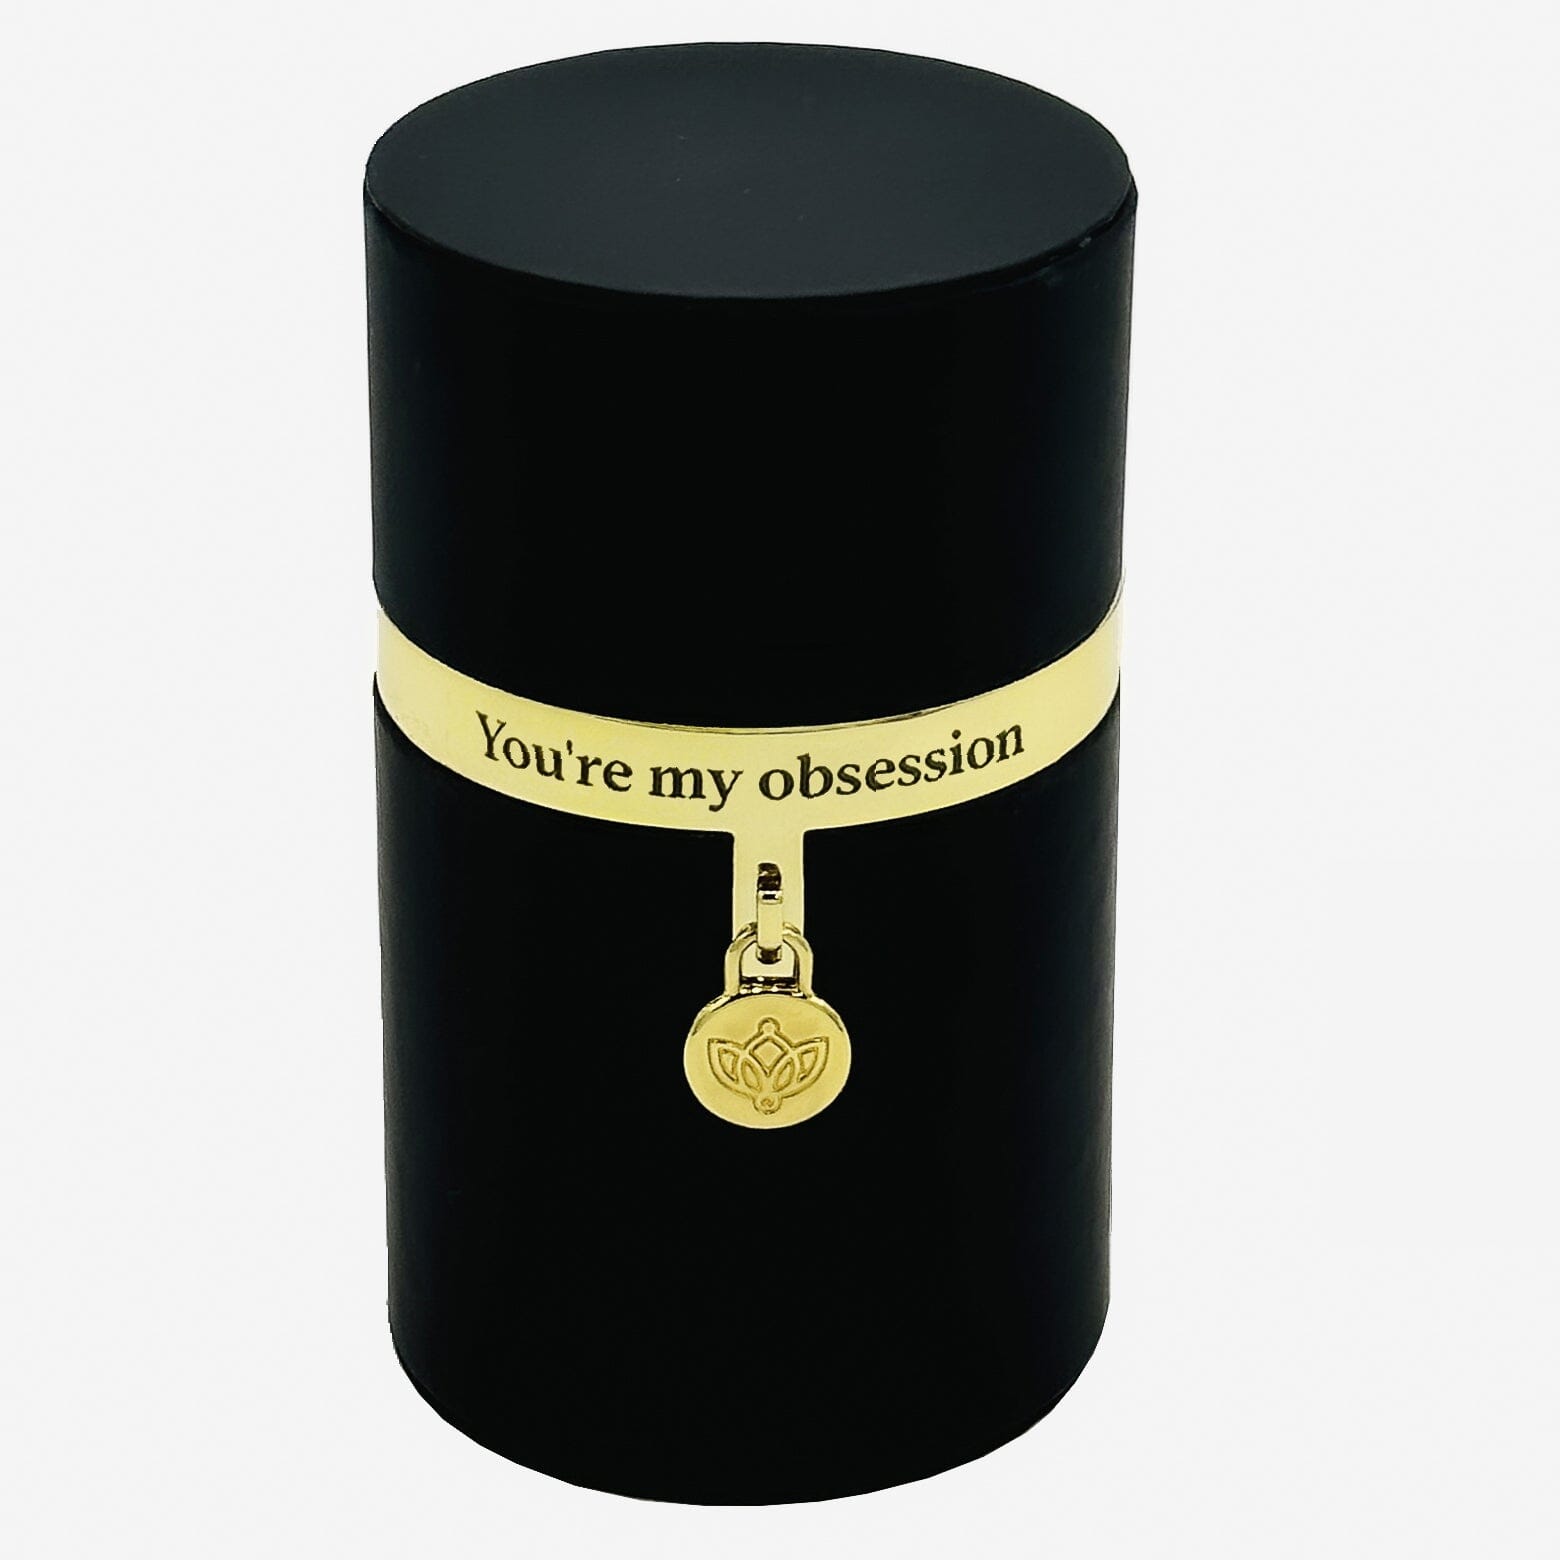 One in a Million™ Round Black Box | You are my obsession | Red Rose - The Million Roses